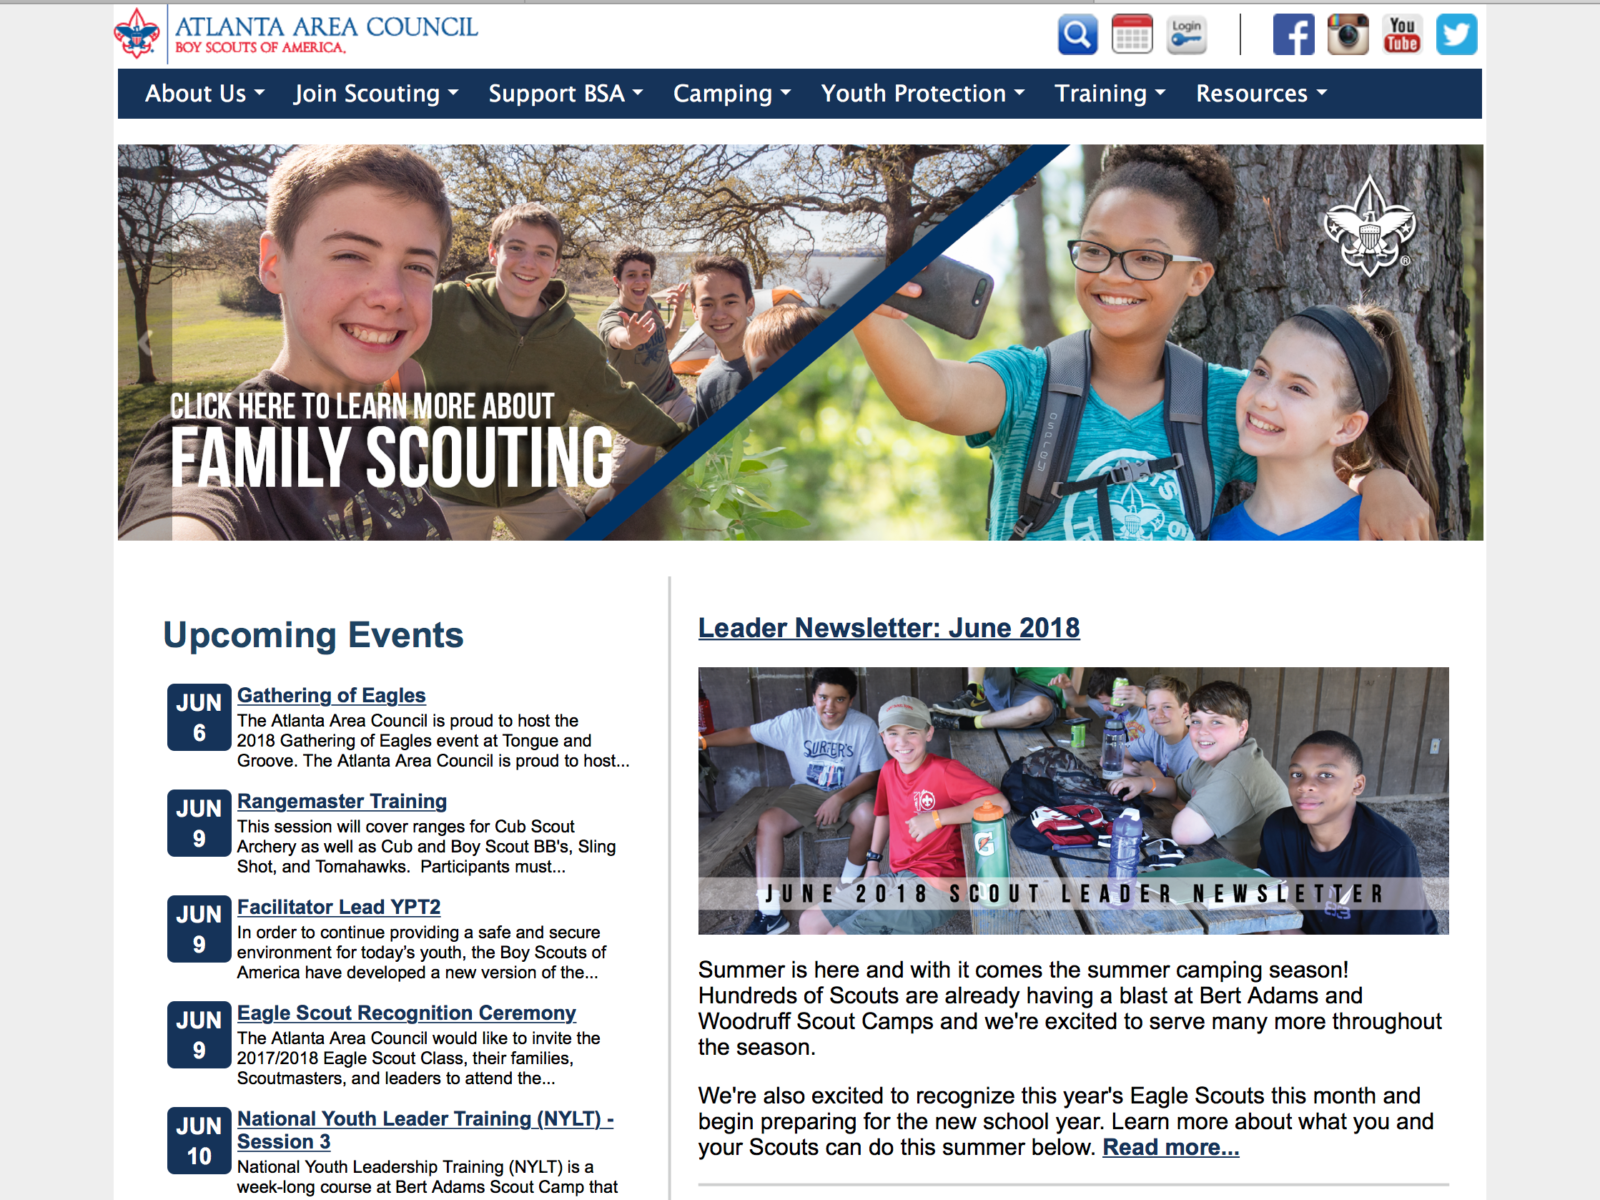 Website for the Atlanta Area Council of the Boy Scouts of America